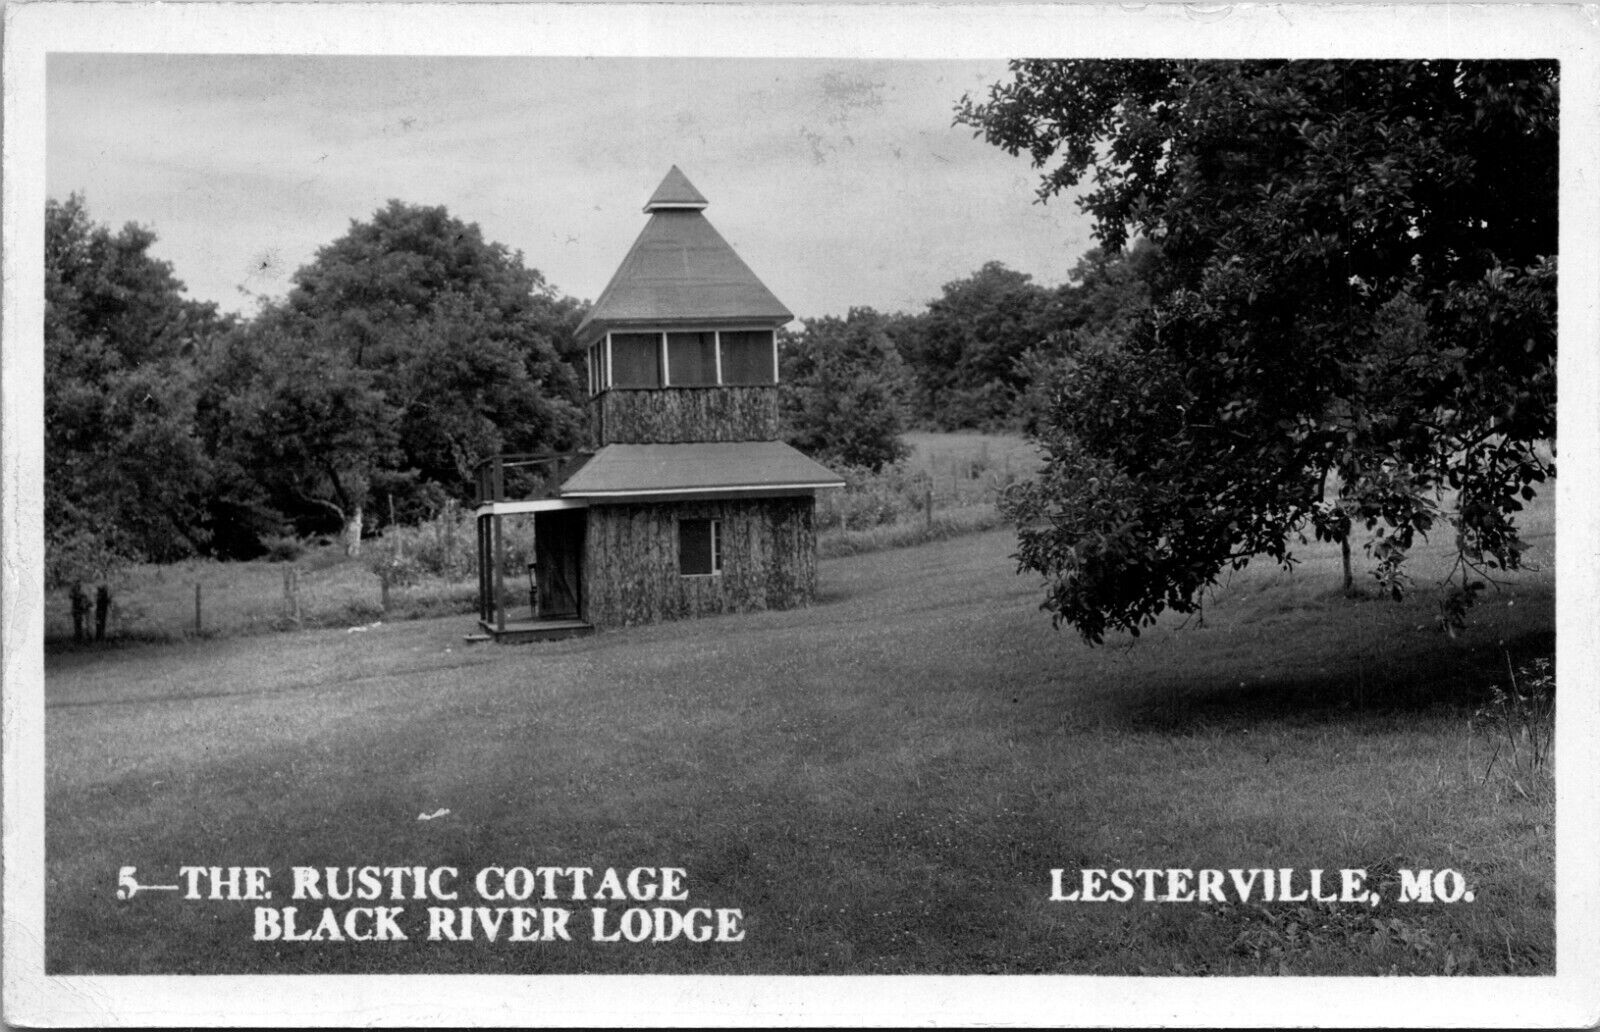 RPPC The Rustic Cottage BLACK RIVER LODGE real photo postcard LESTERVILLE MO 